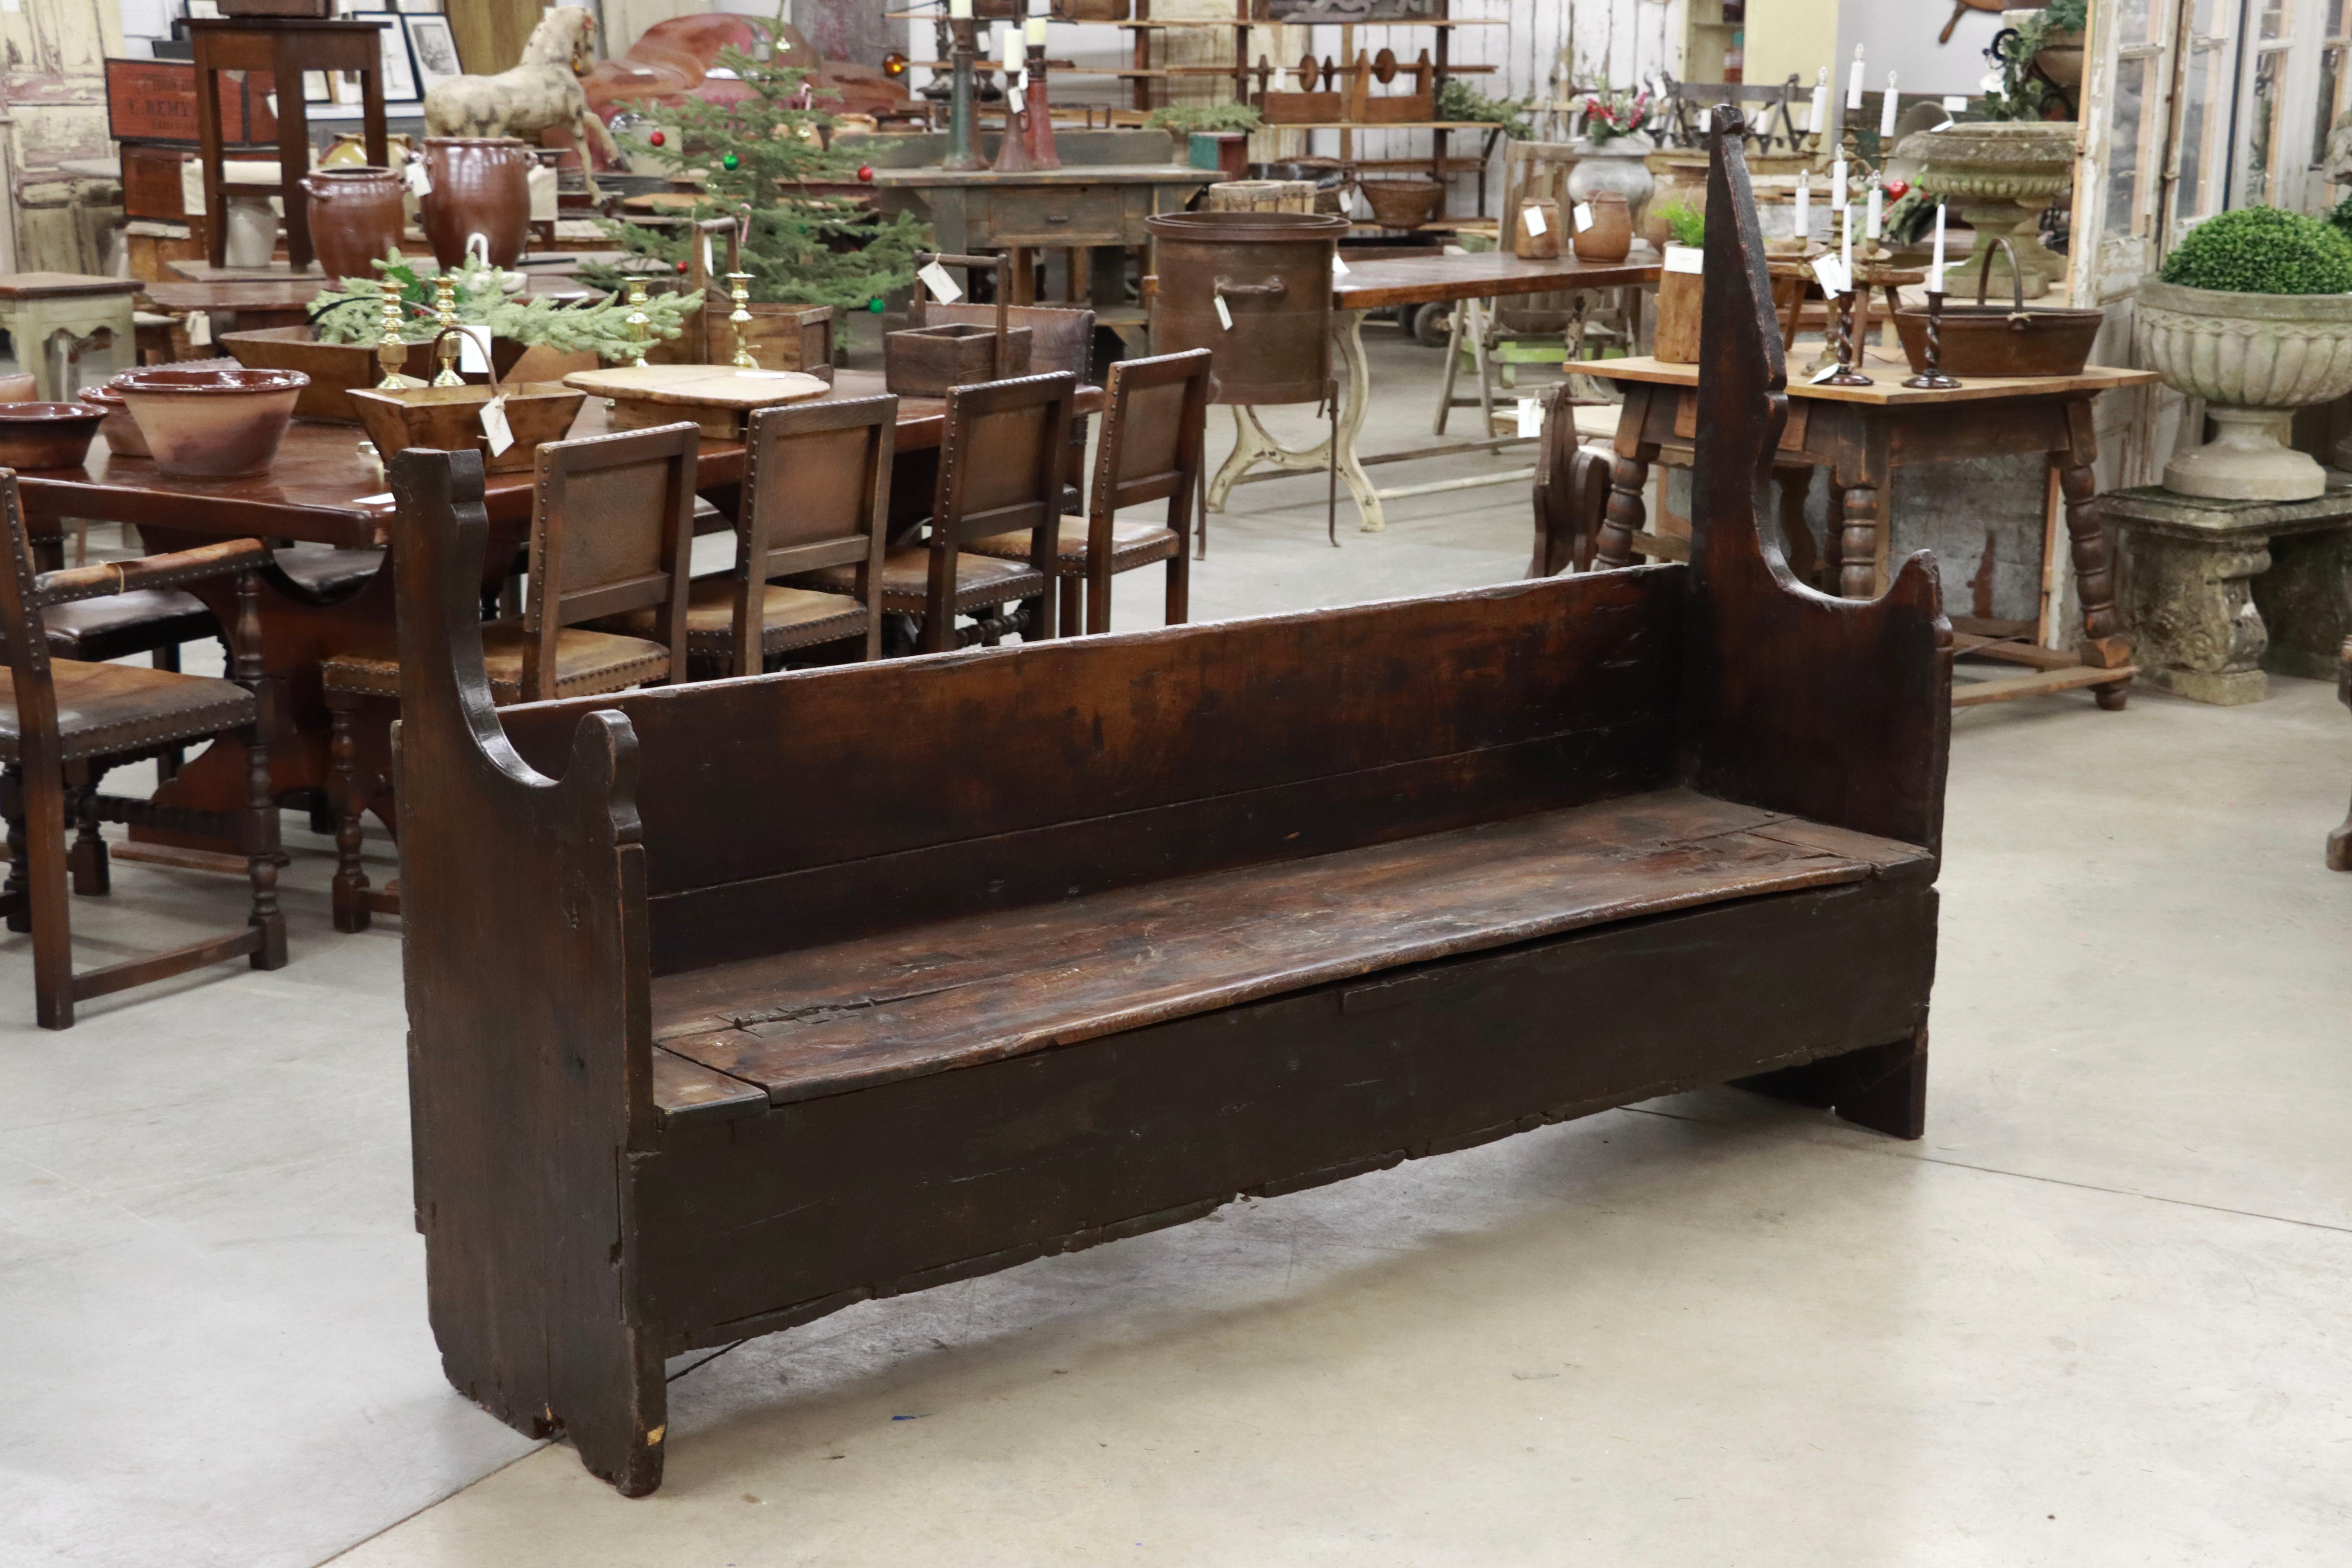 Circa 1700s primitive rustic farmhouse bench from the Cataluña region, Spain.

The patina is superb with its dark rich finish acquired over centuries of use. It is of a solid plank construction with a hinged lid for storage. The original ancient